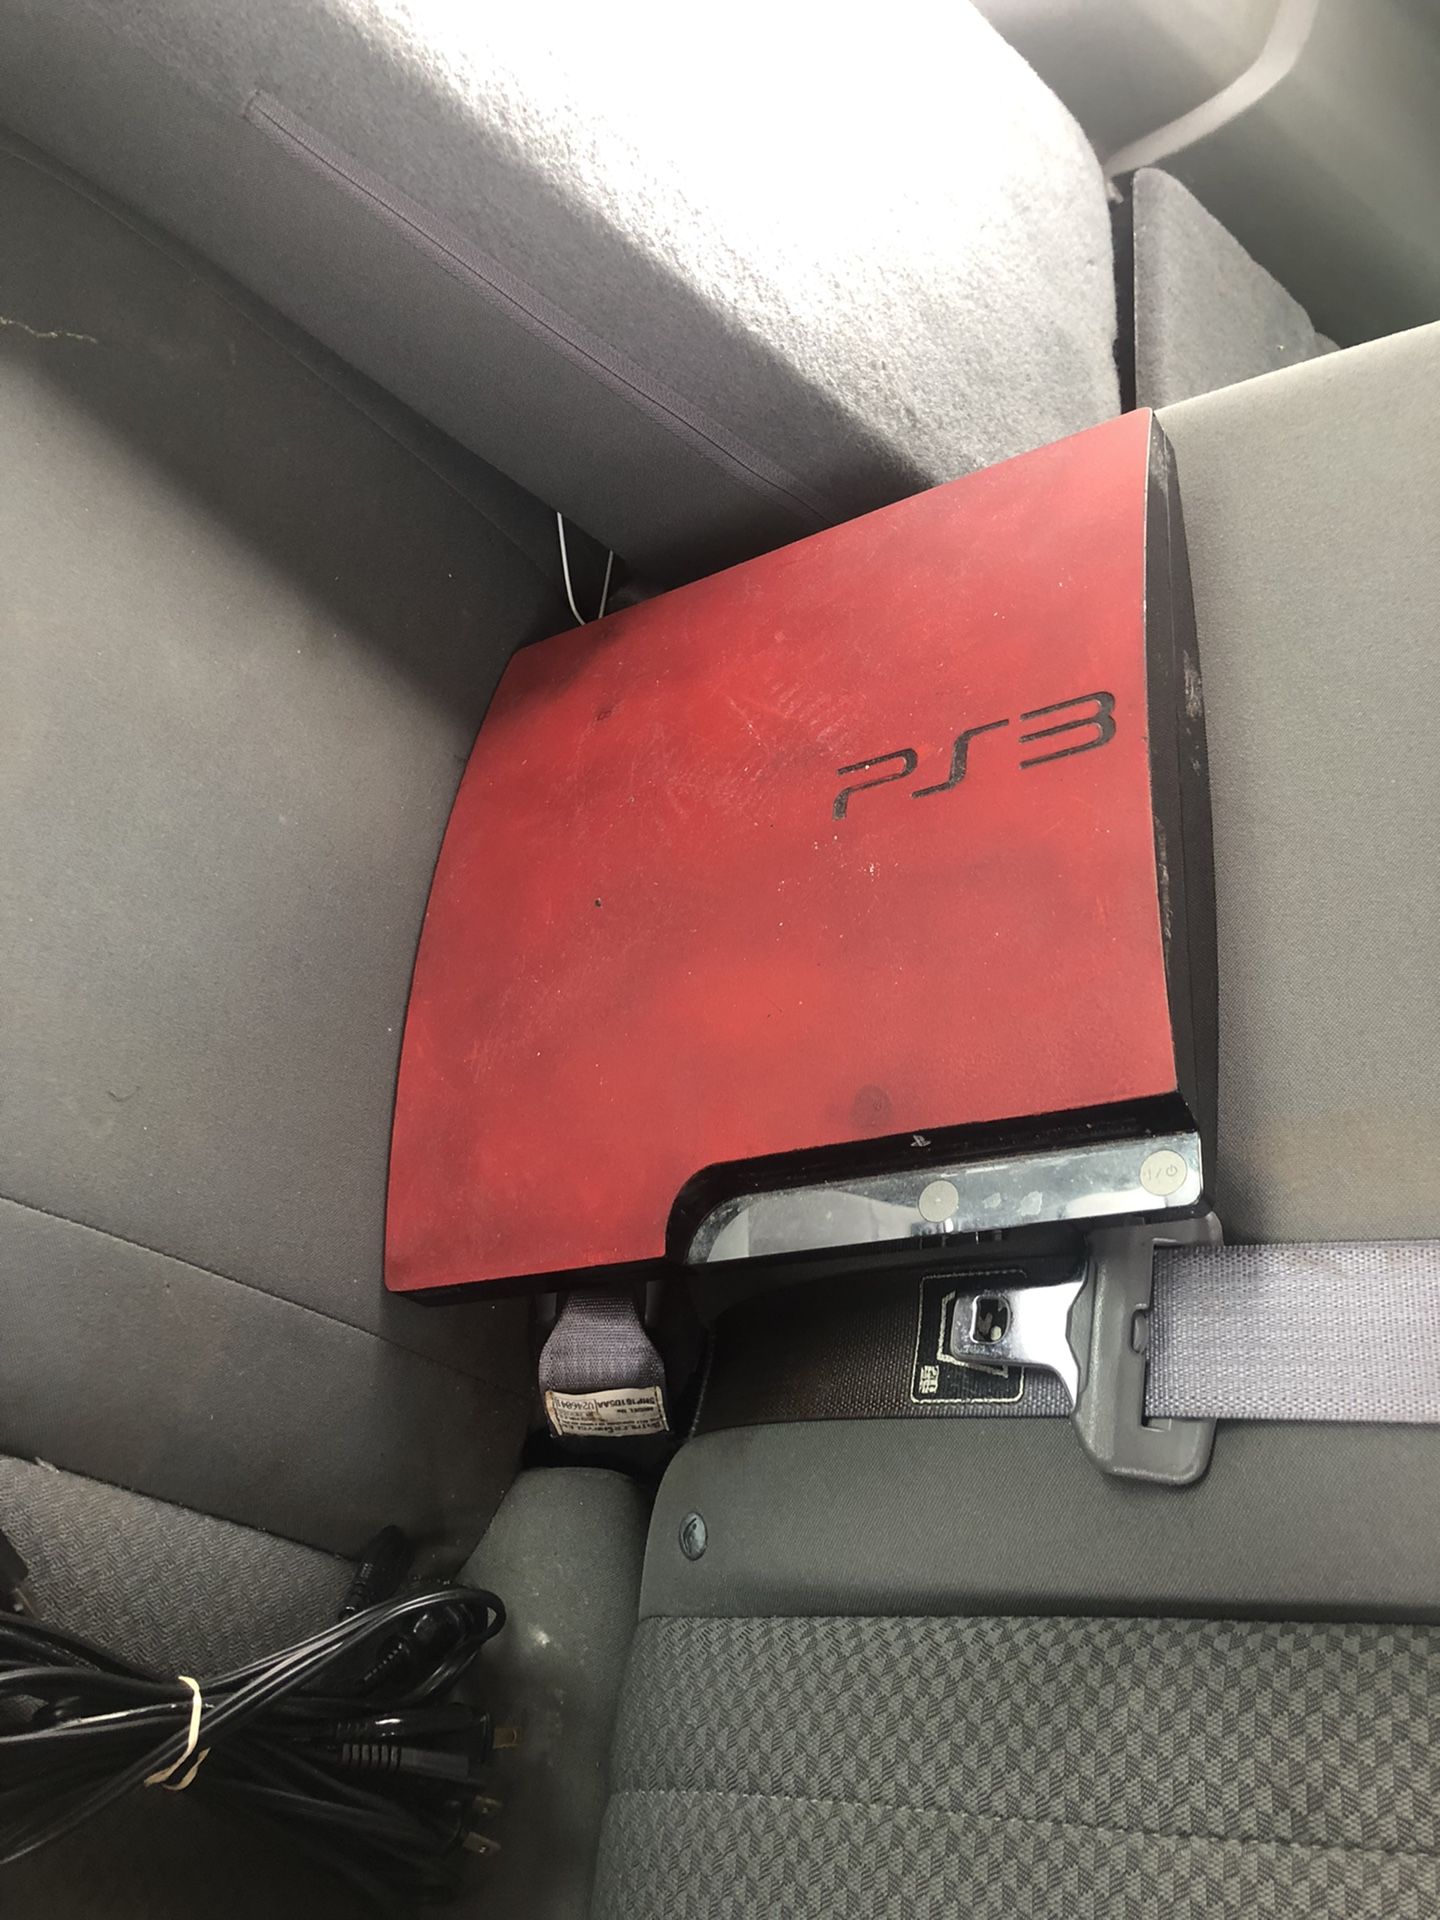 PS3, Perfect Condition.